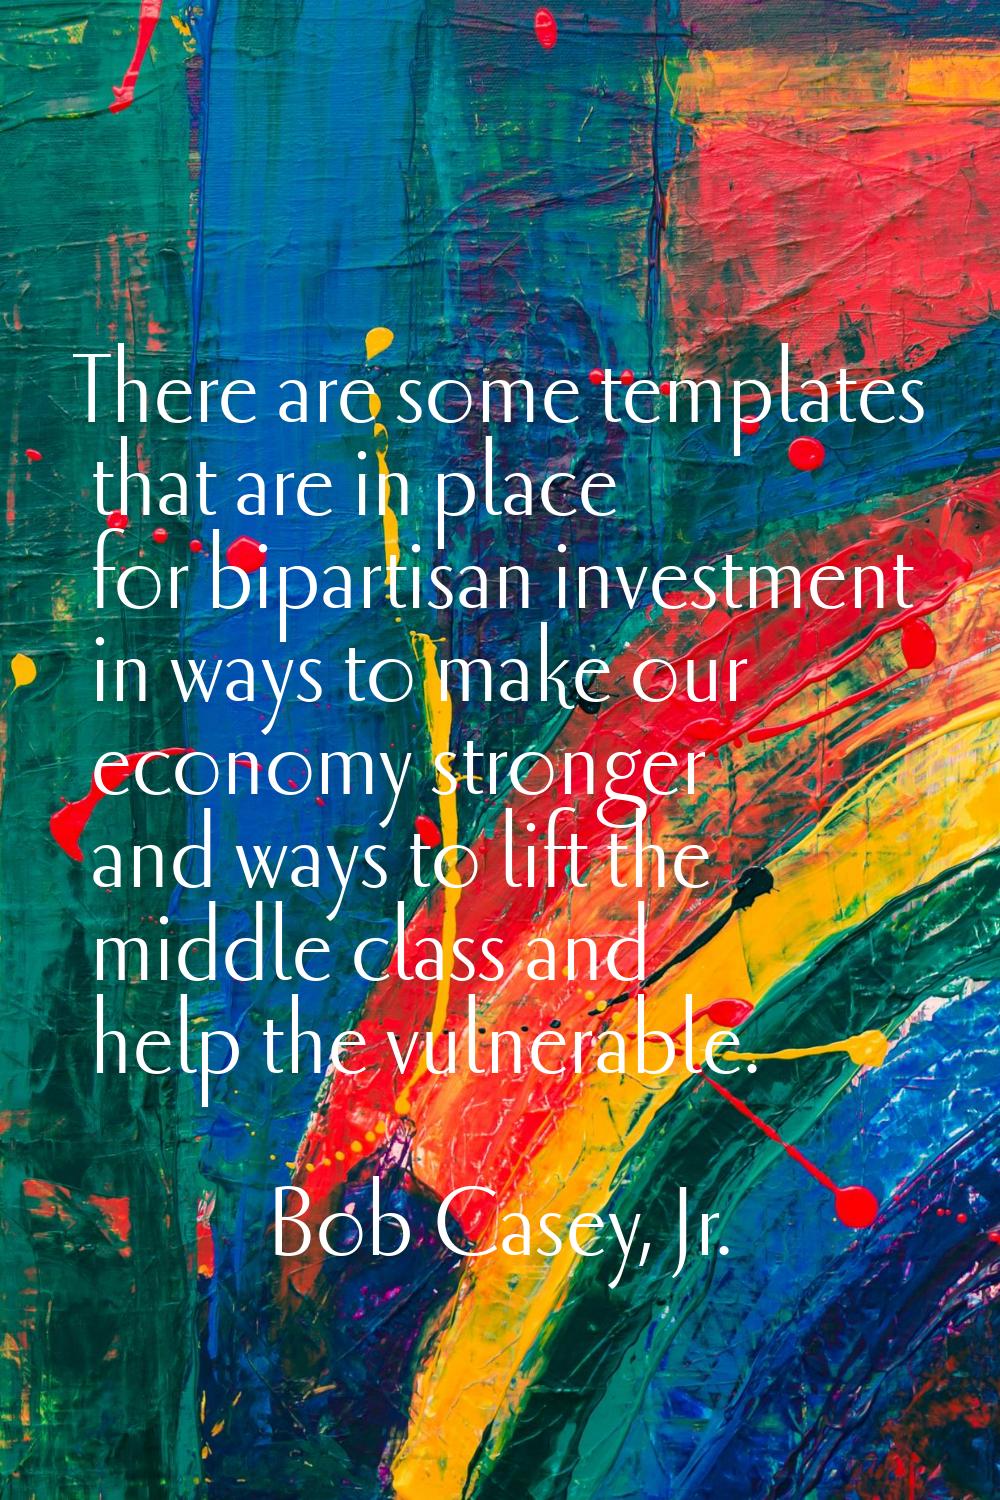 There are some templates that are in place for bipartisan investment in ways to make our economy st